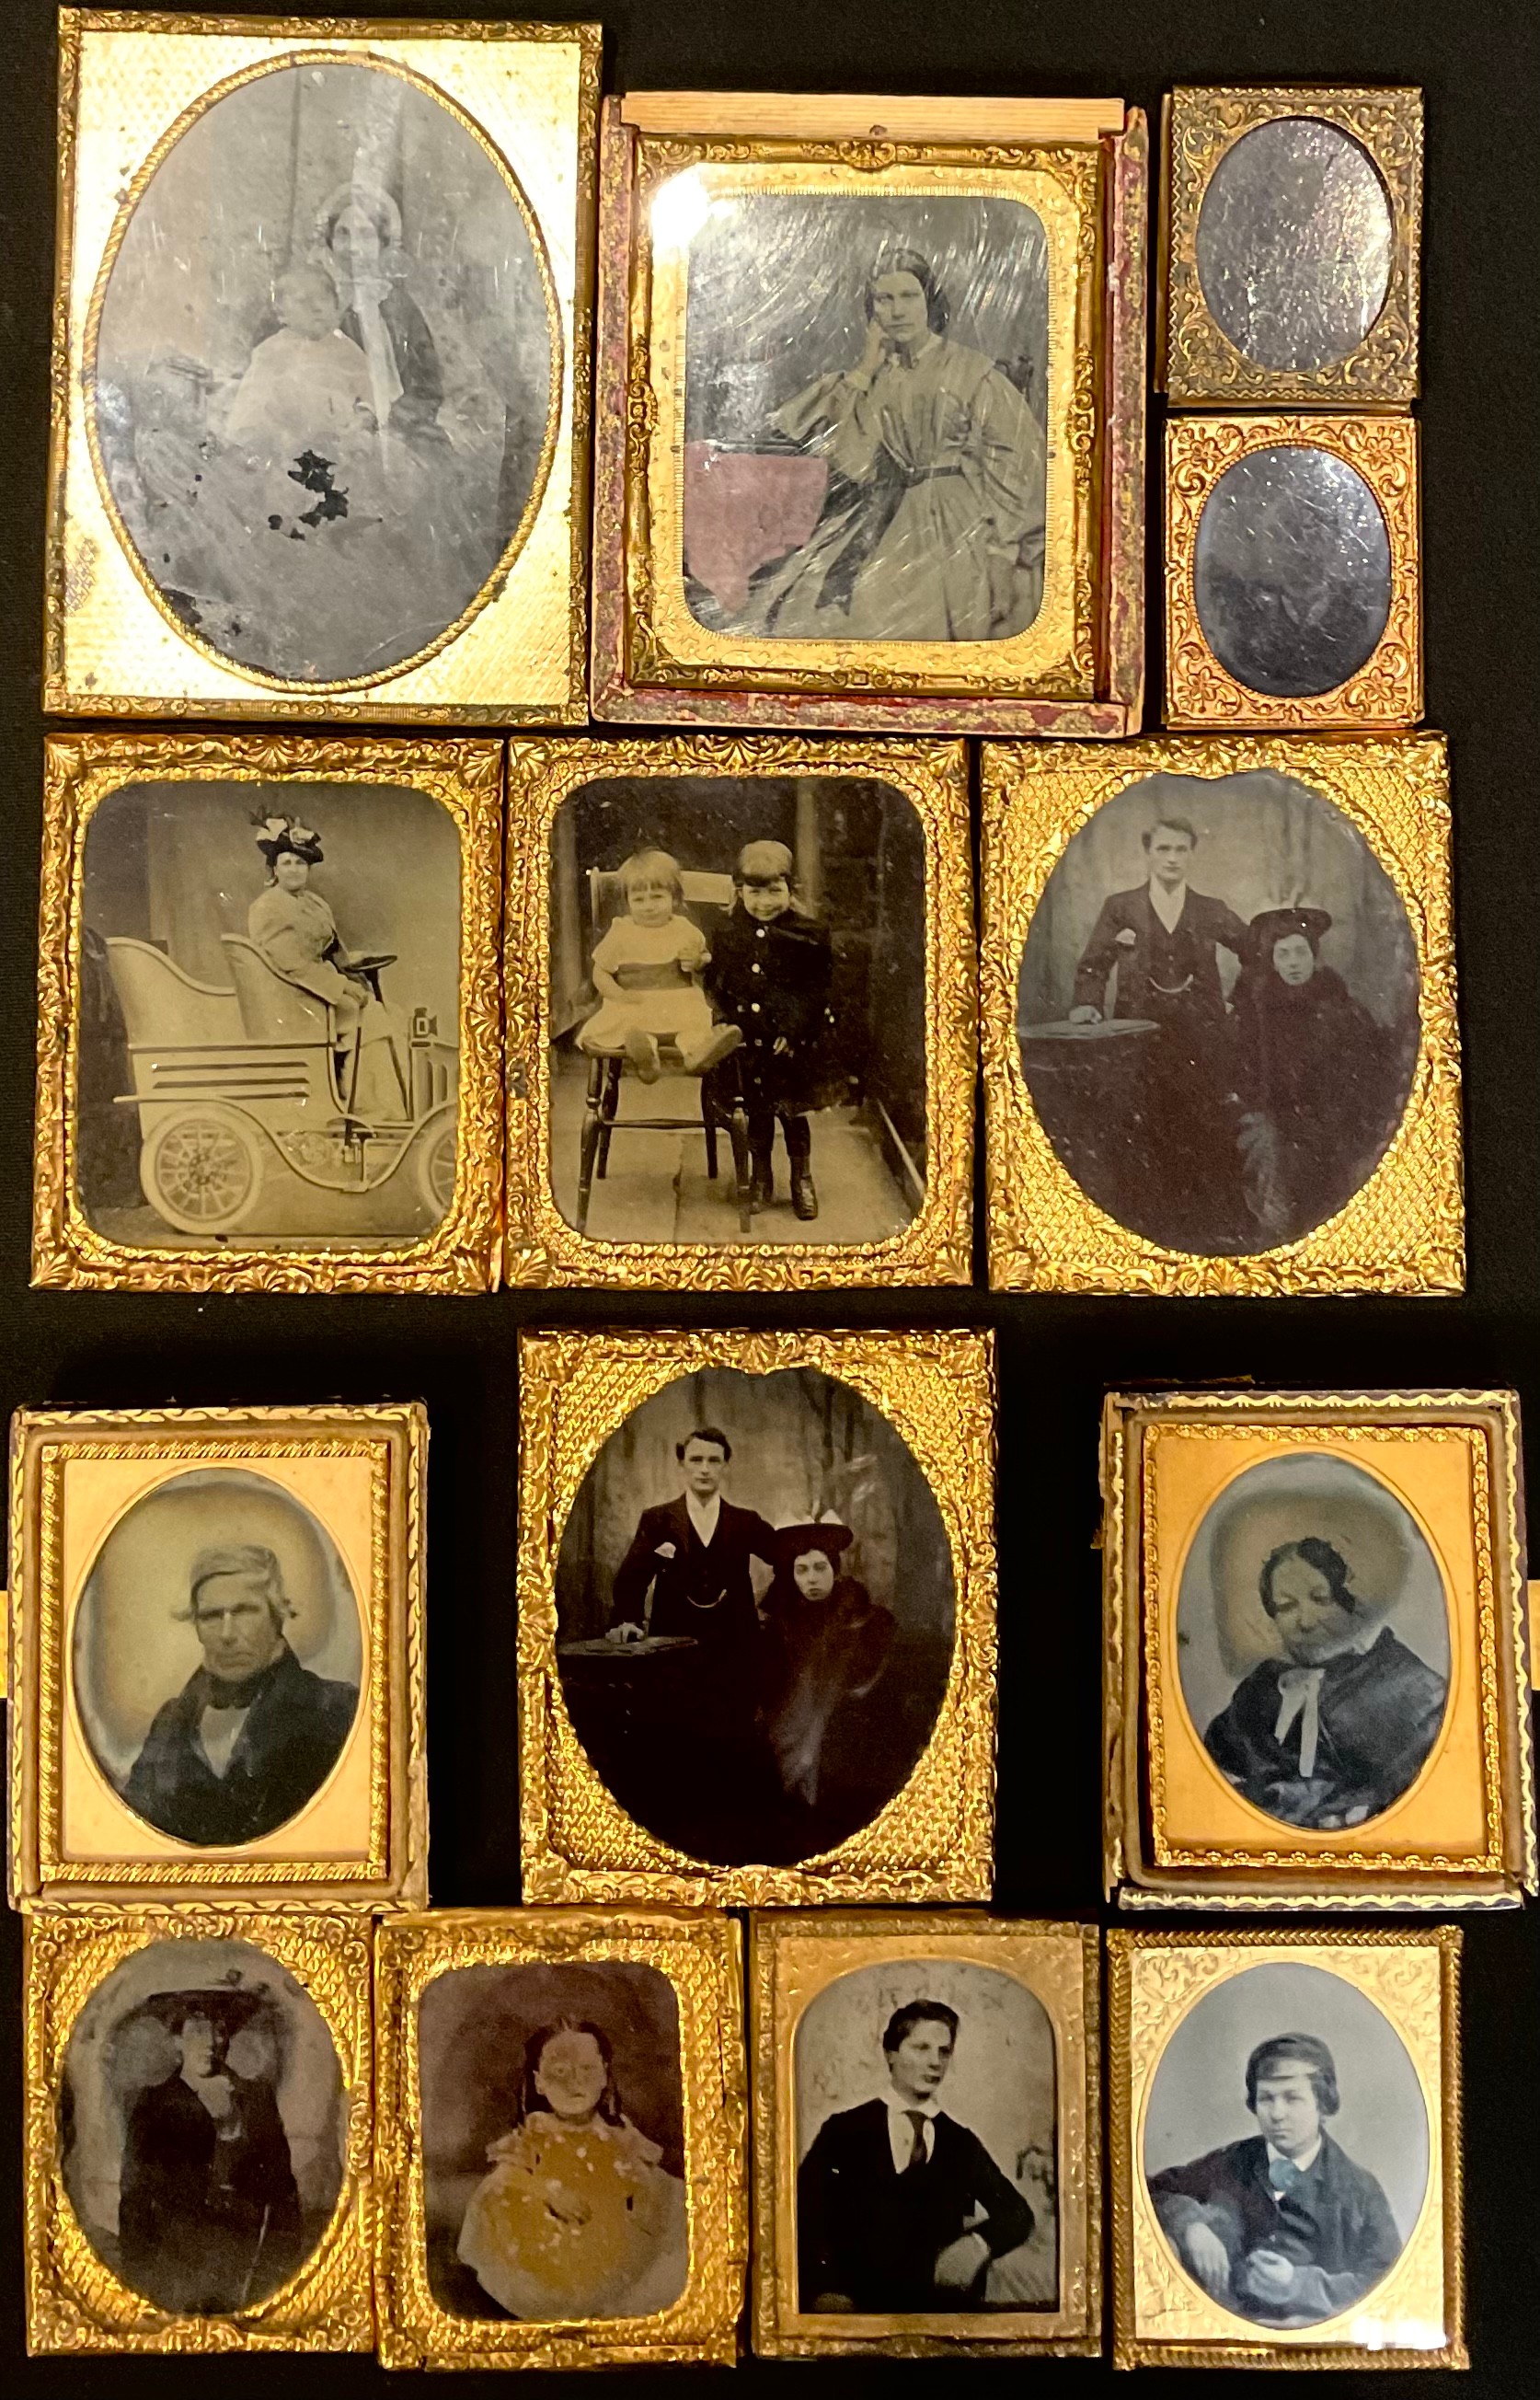 Photography - a collection of 19th century ambrotypes and cabinet portrait photographs